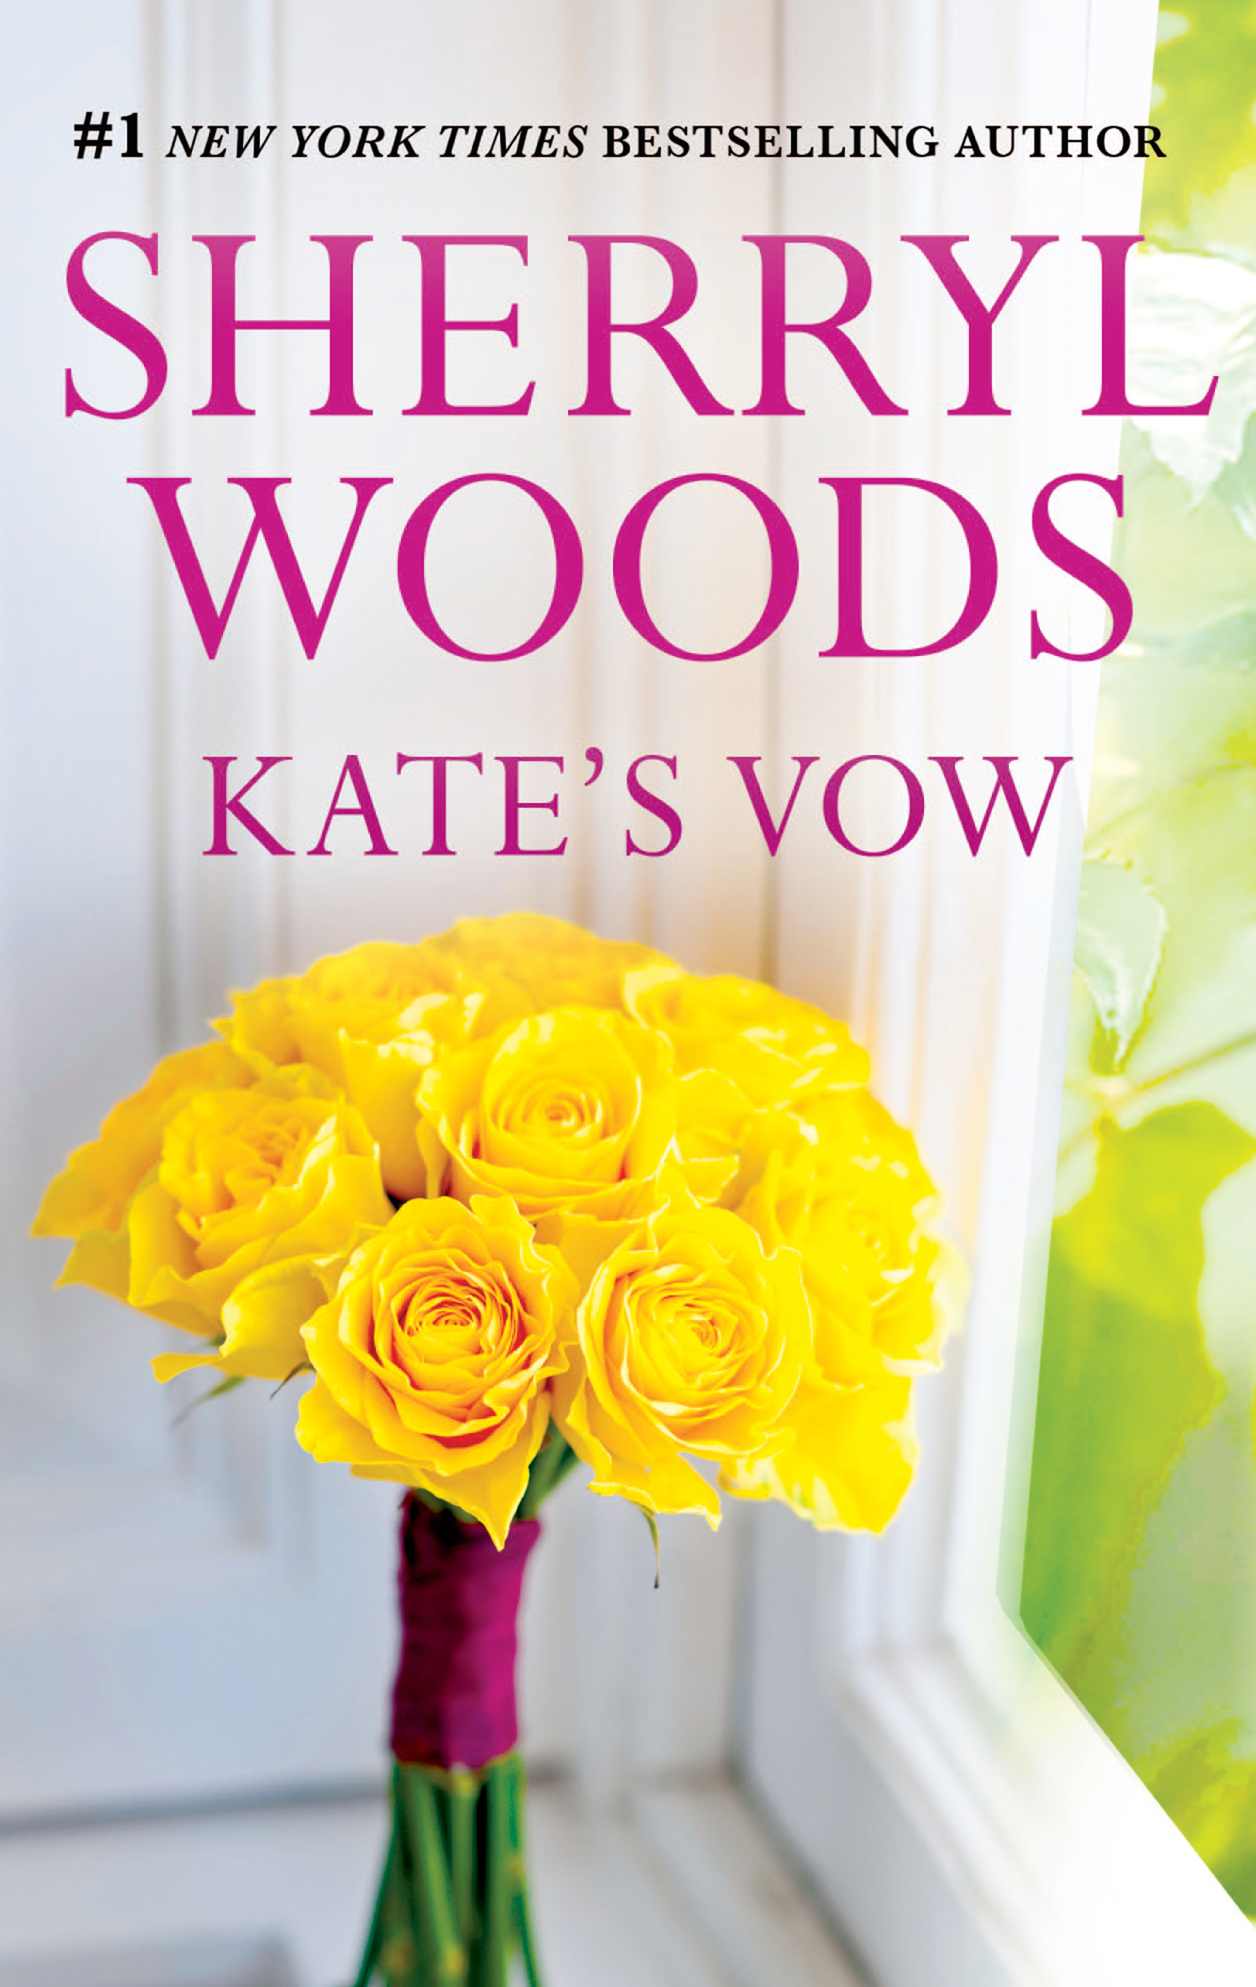 Kate's Vow (Vows) by Sherryl Woods